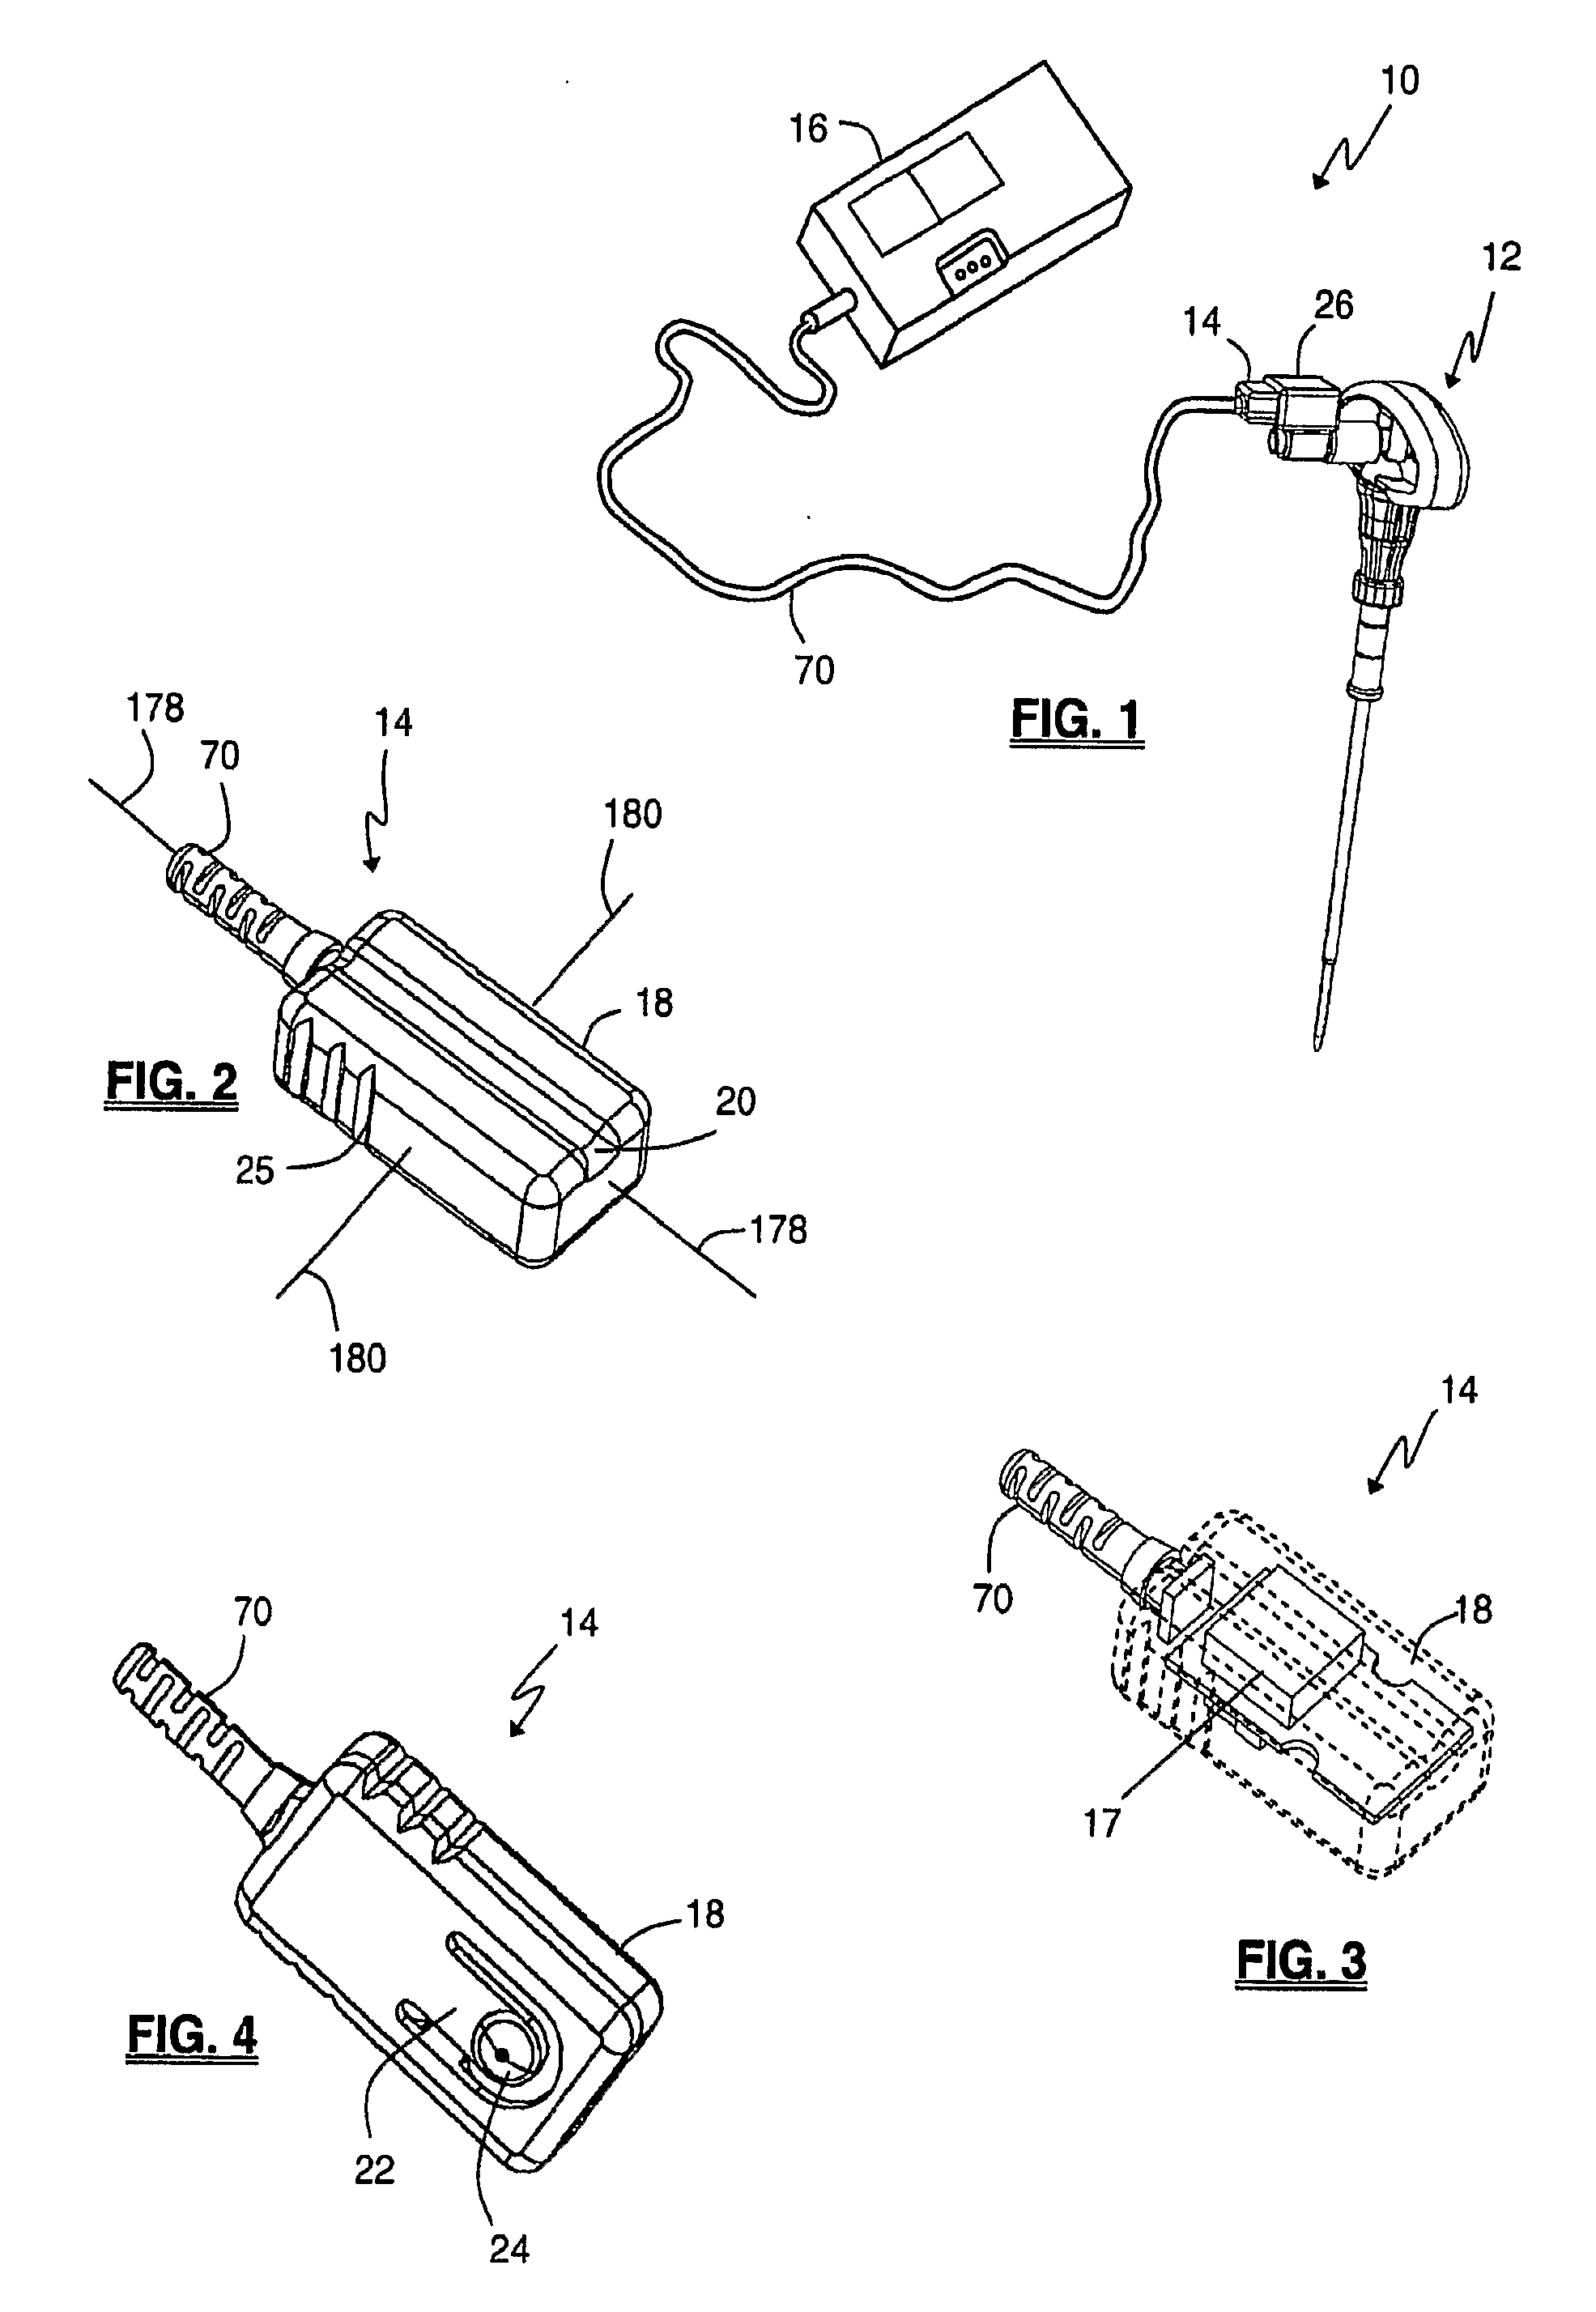 Surgical Trajectory Monitoring System and Related Methods